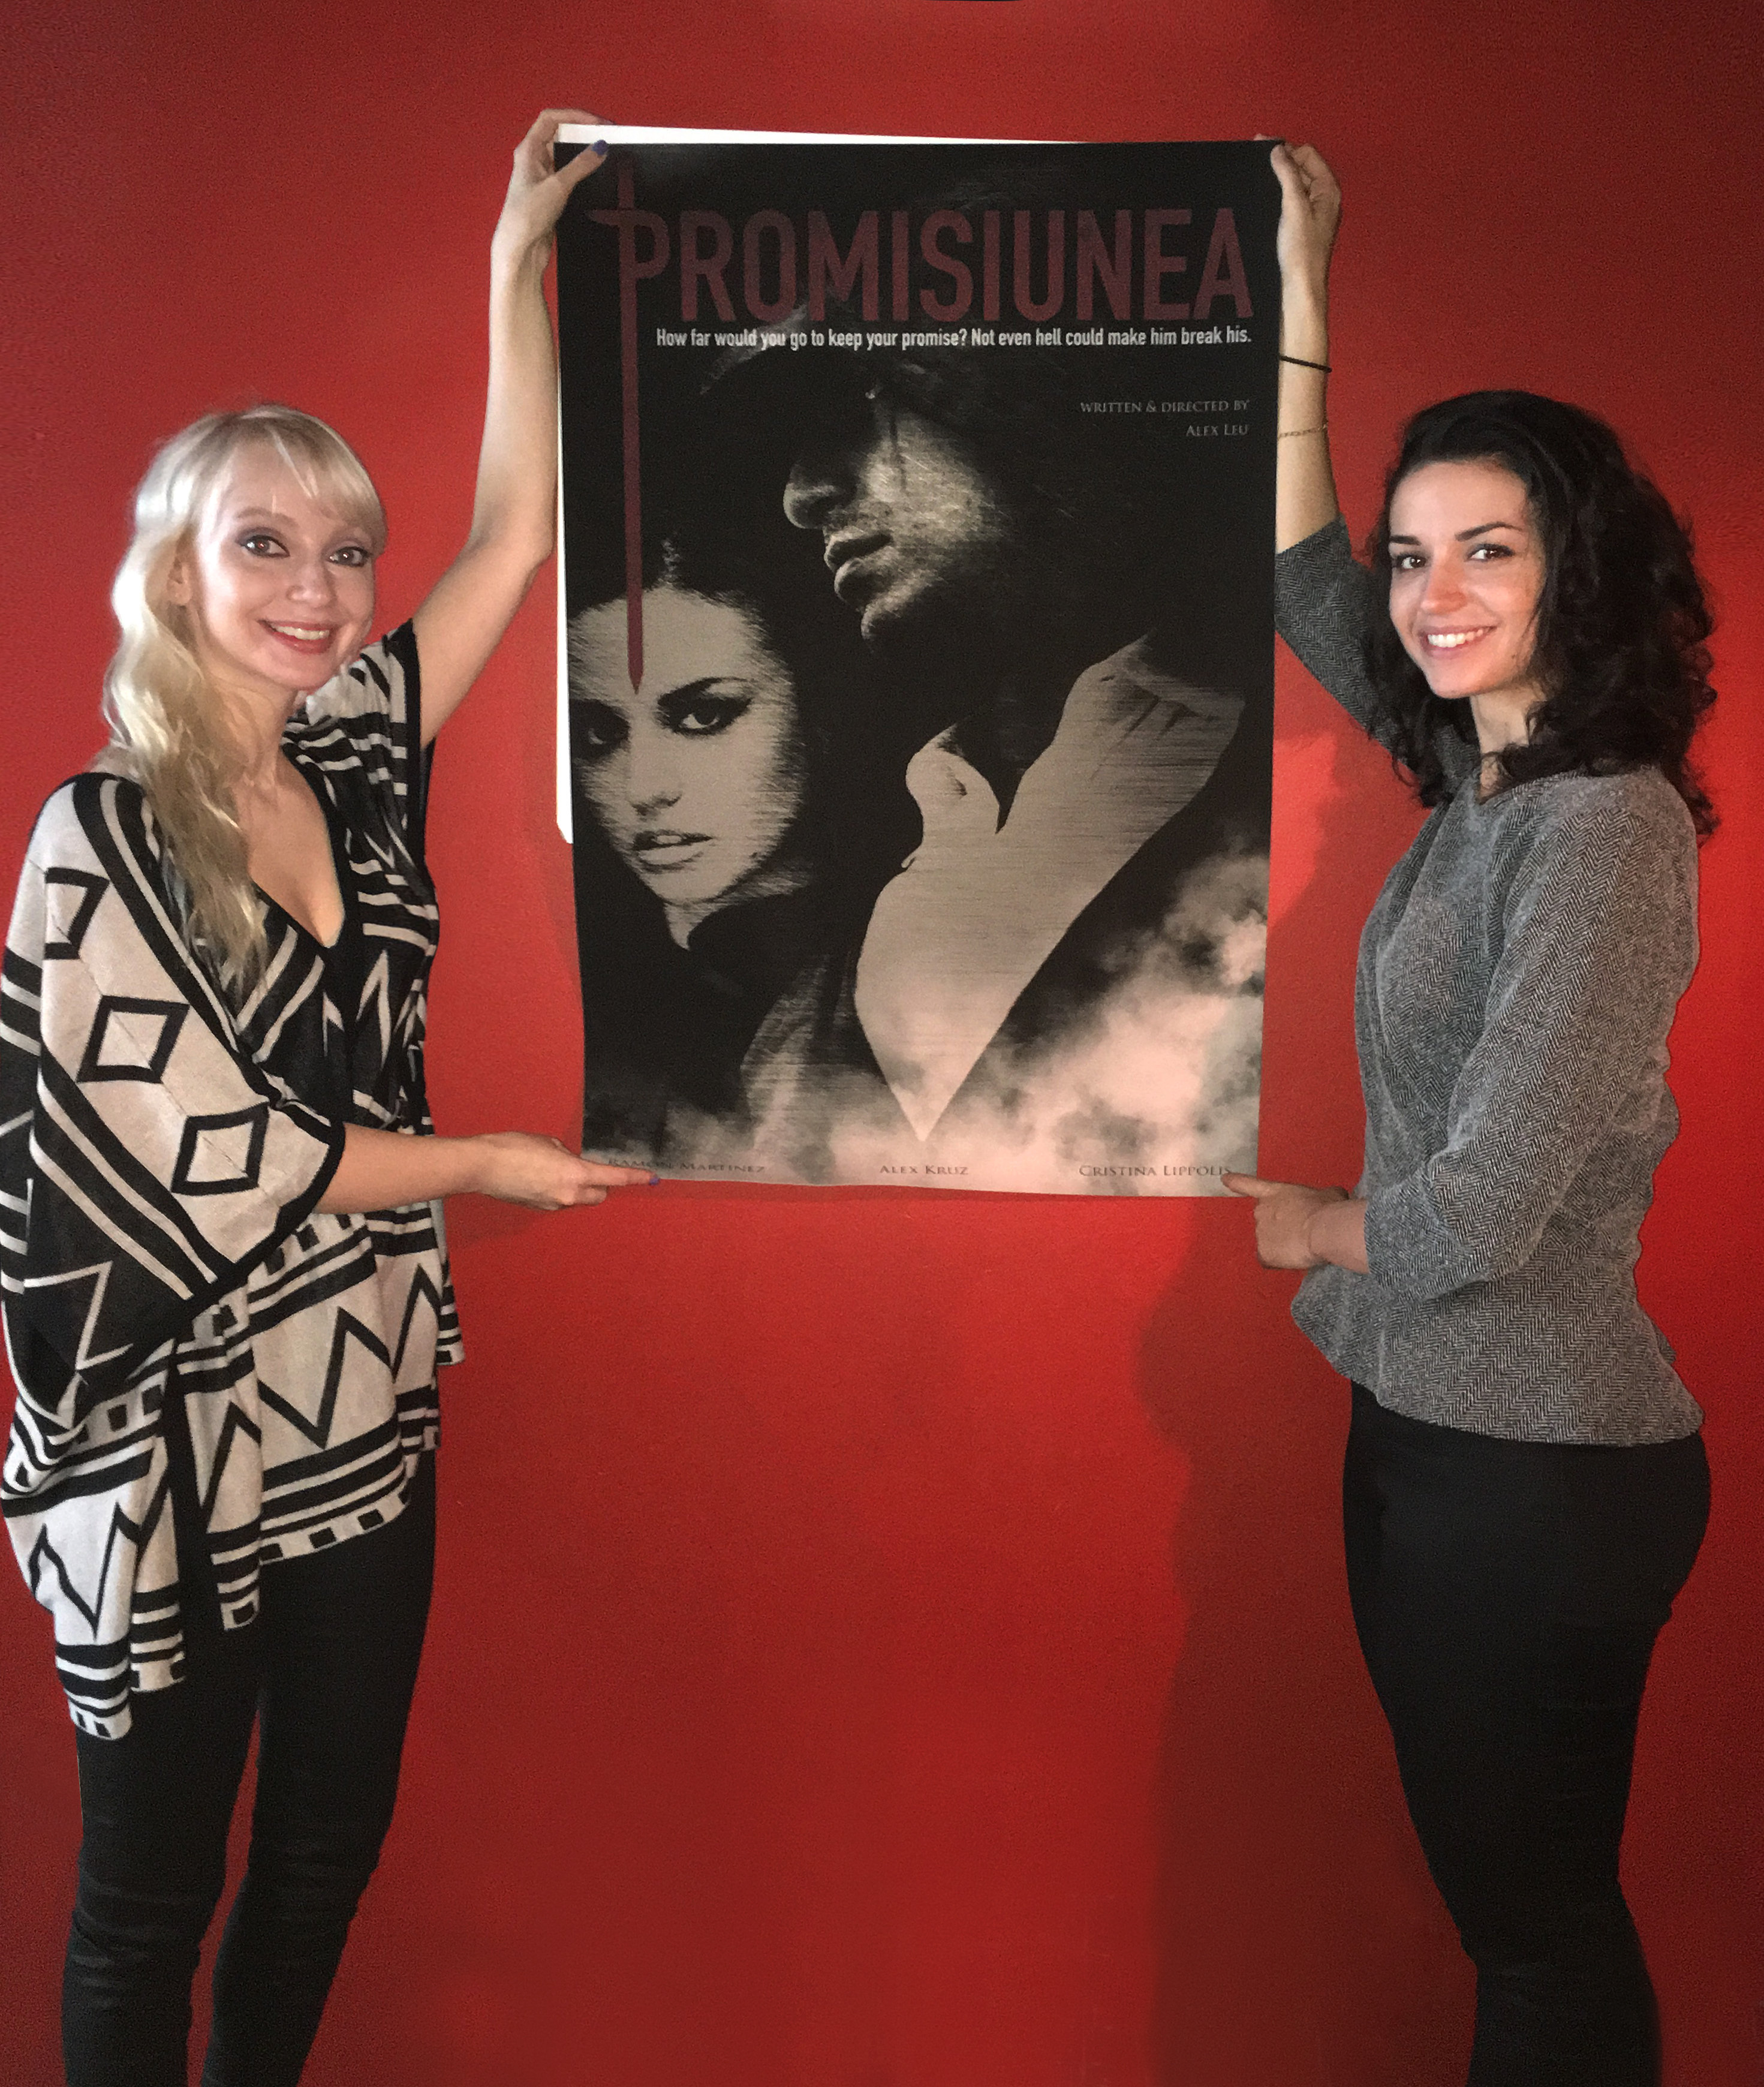 Natalya Lazareva (Creative Director/Producer) and Cristina Lippolis (Lead Actress/Producer) hold the movie poster up for the film Promisiunea